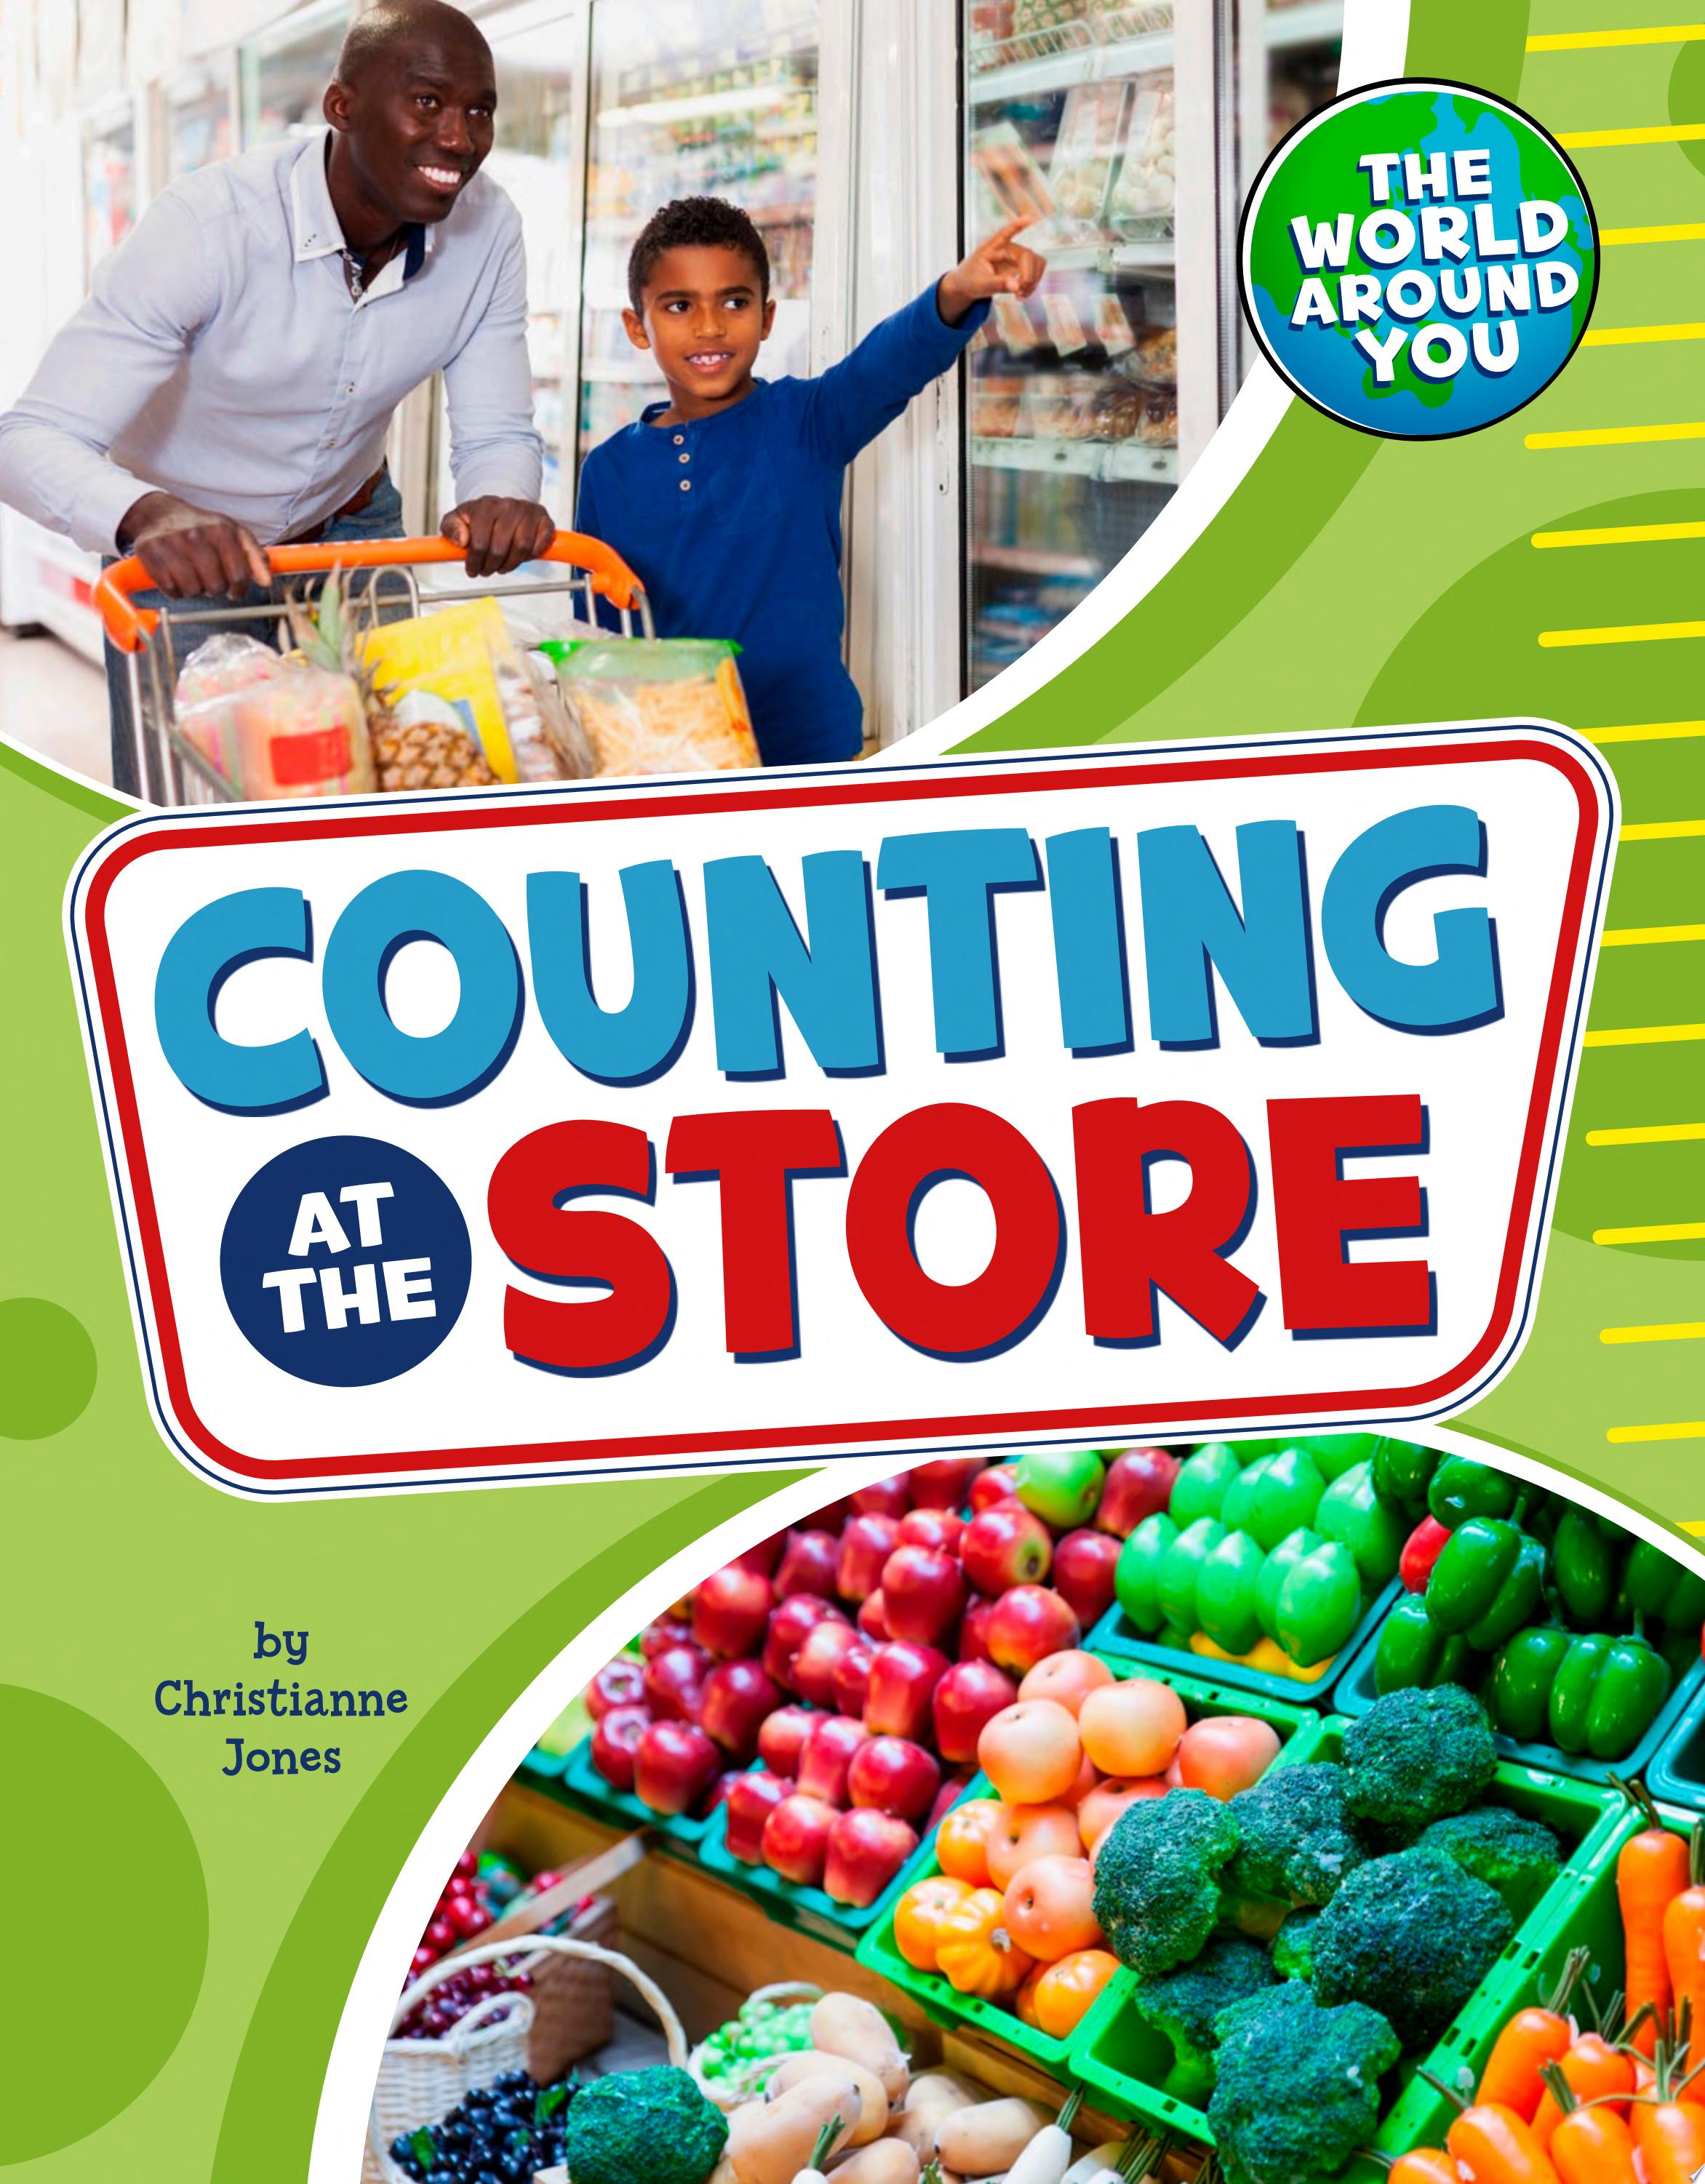 Image for "Counting at the Store"